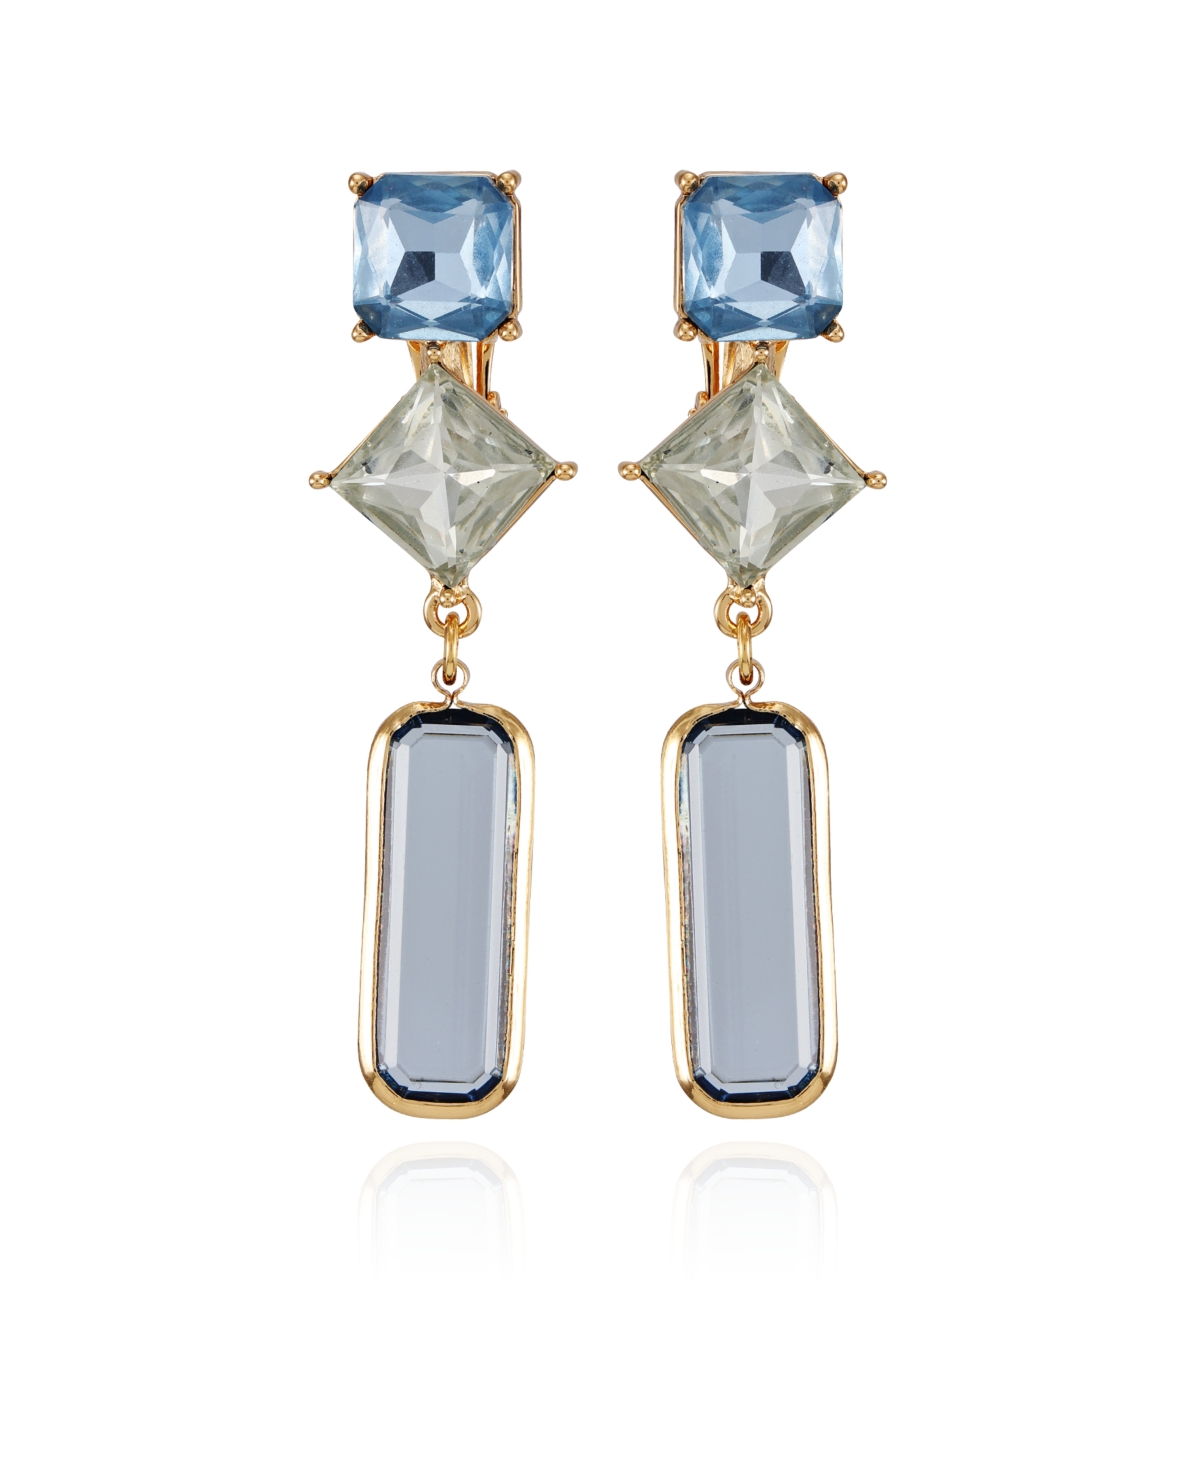 Gold-Tone Blue Glass Stone Drop Clip On Earrings - Gold